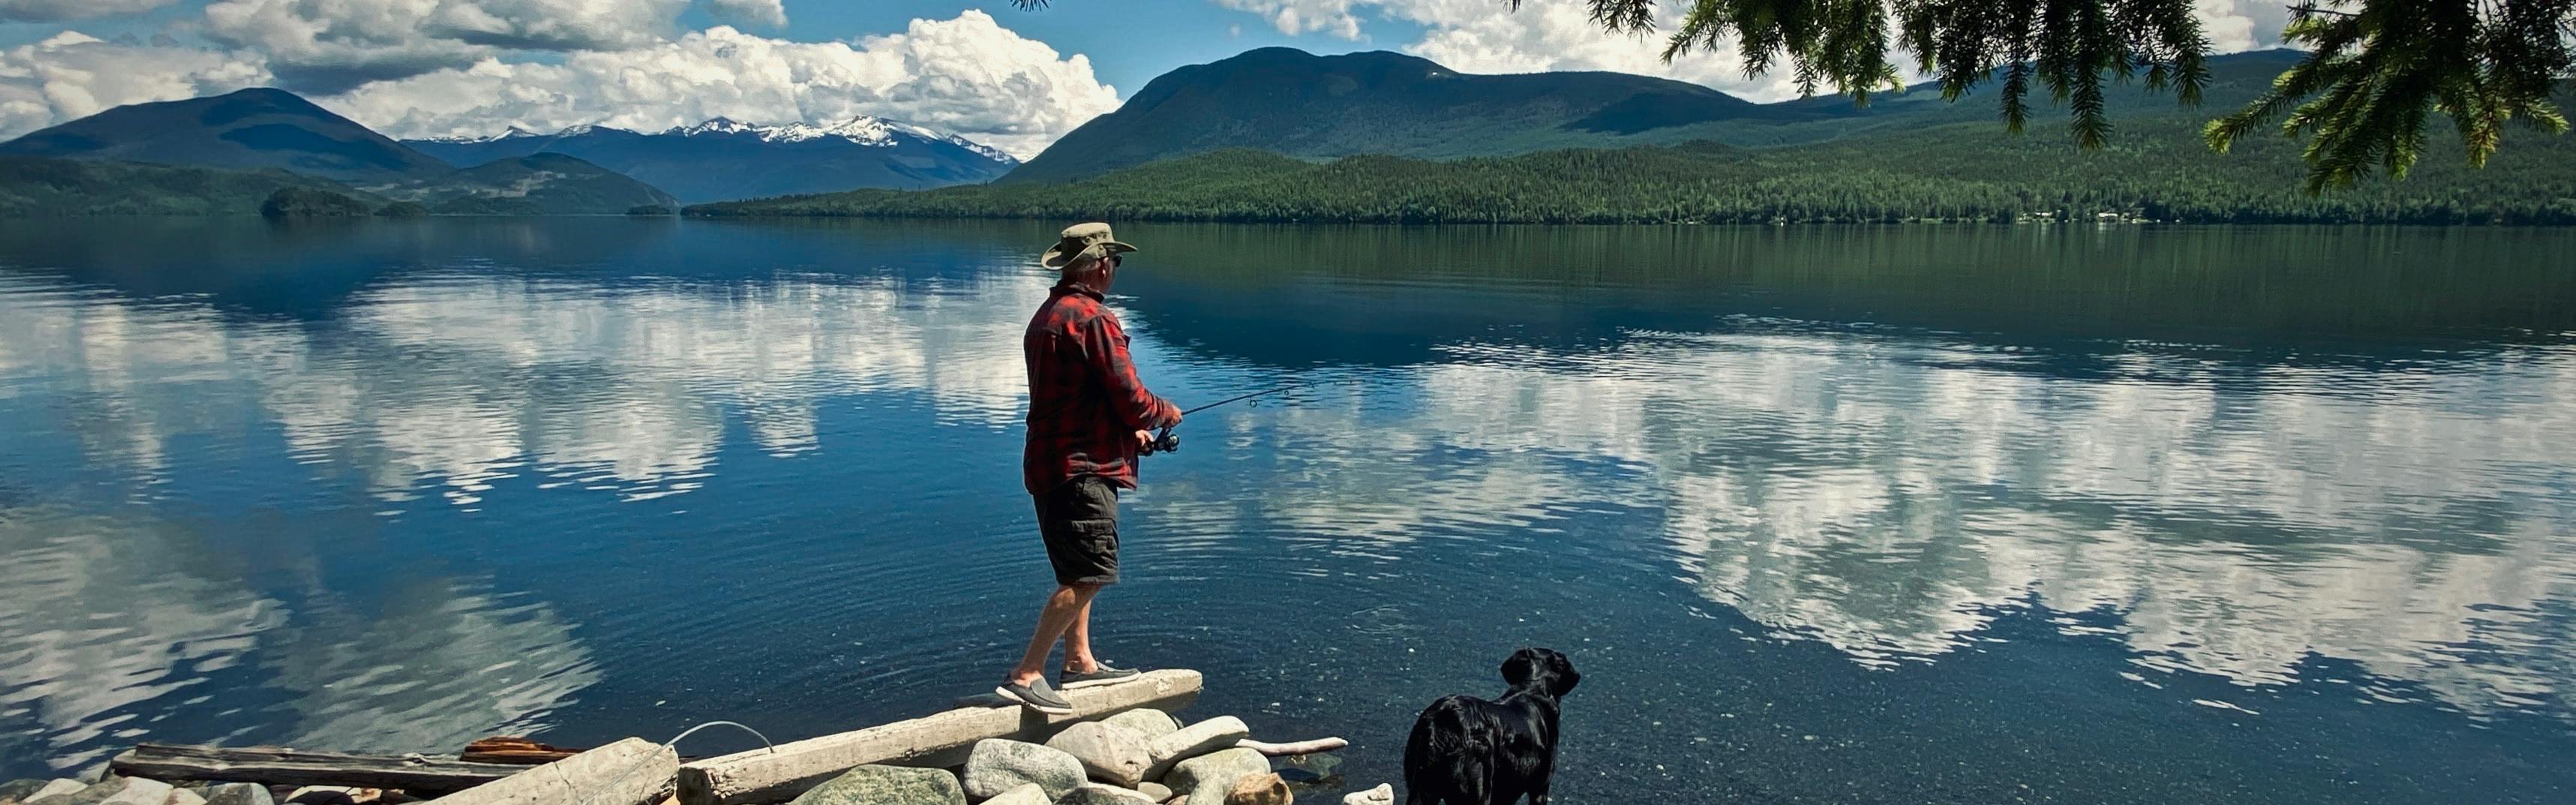 A man stands on rocks at a lake's edge and fishes. A black lab stands next to him.